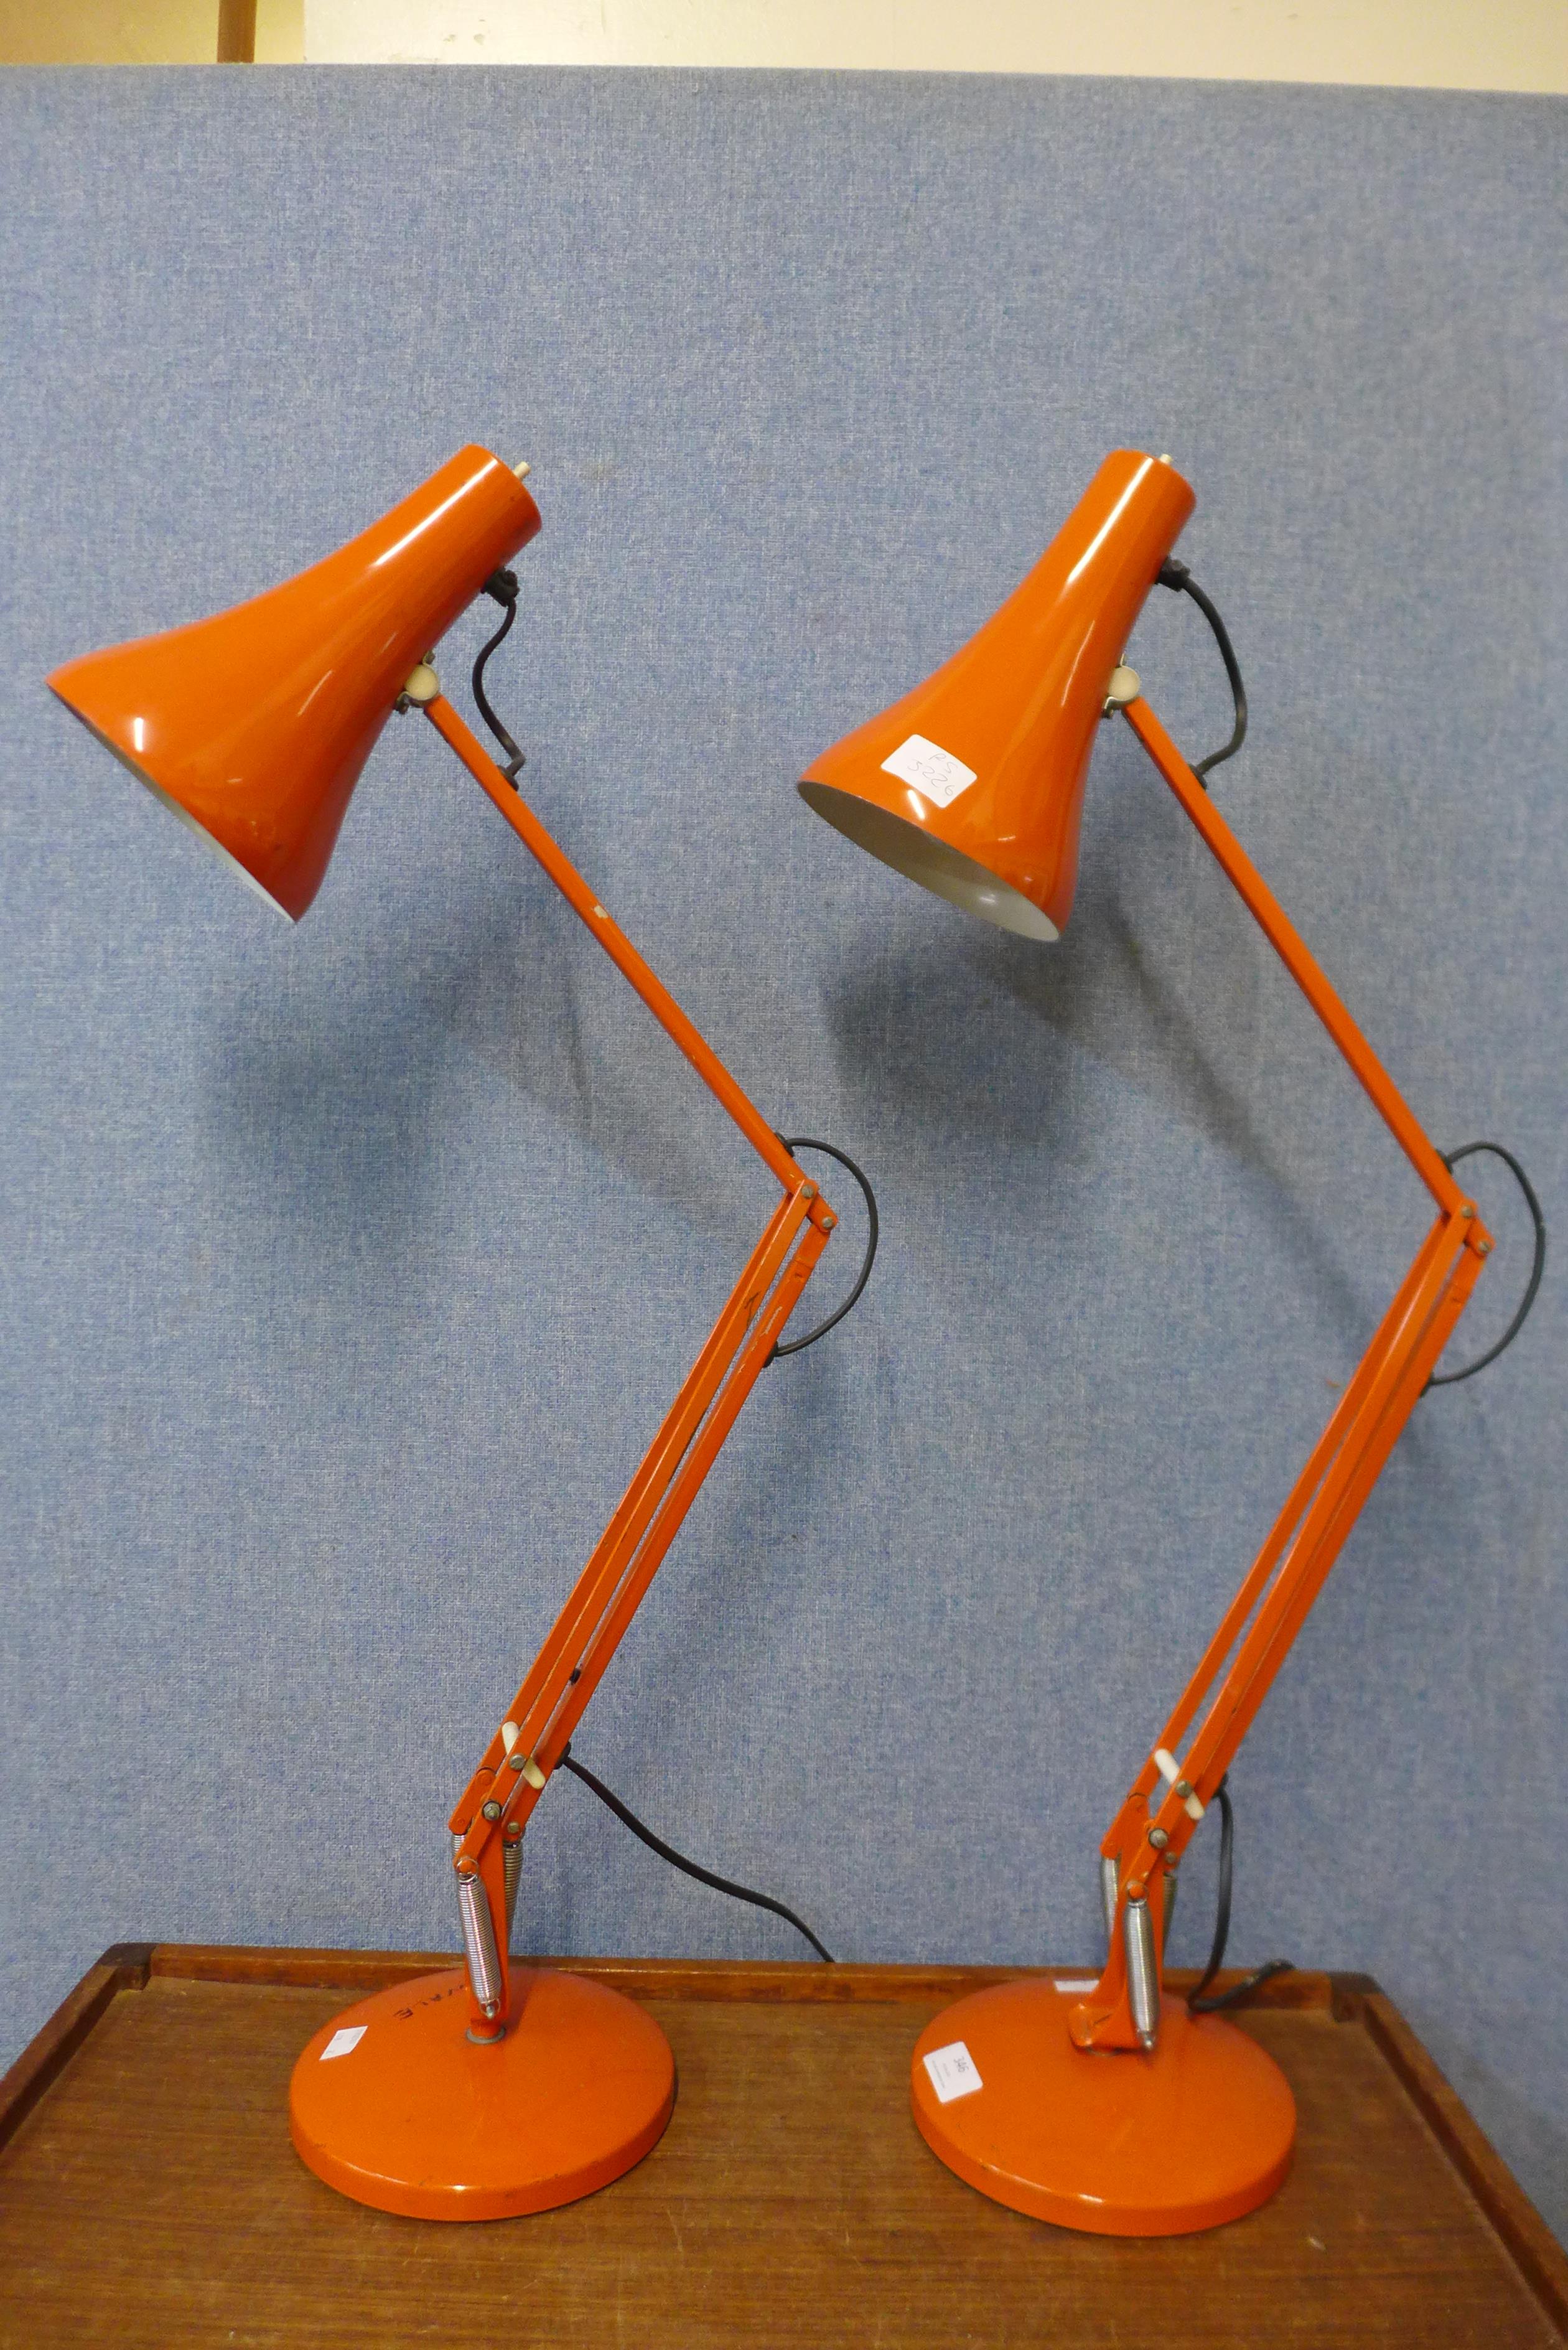 A pair of vintage orange metal anglepoise desk lamps